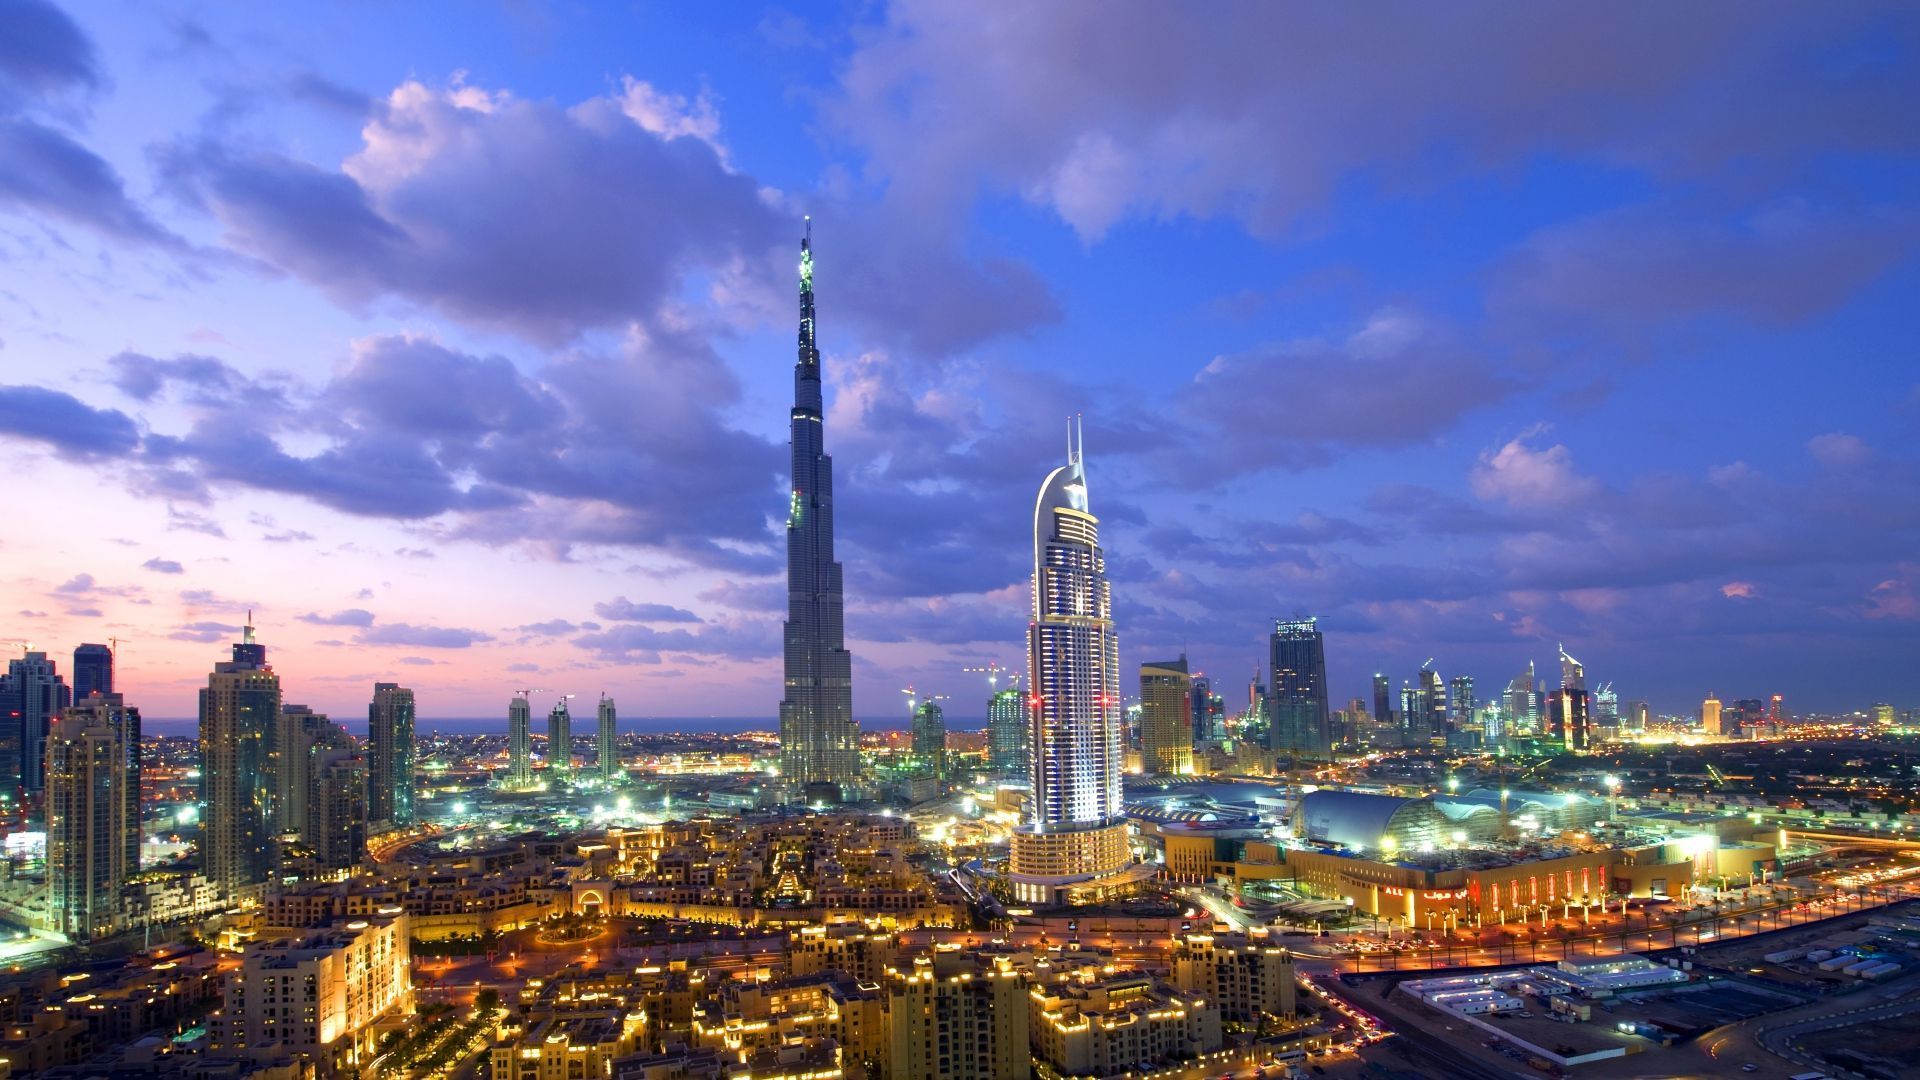 Download Wallpaper 1920x1080 Dubai, Building, View from the top